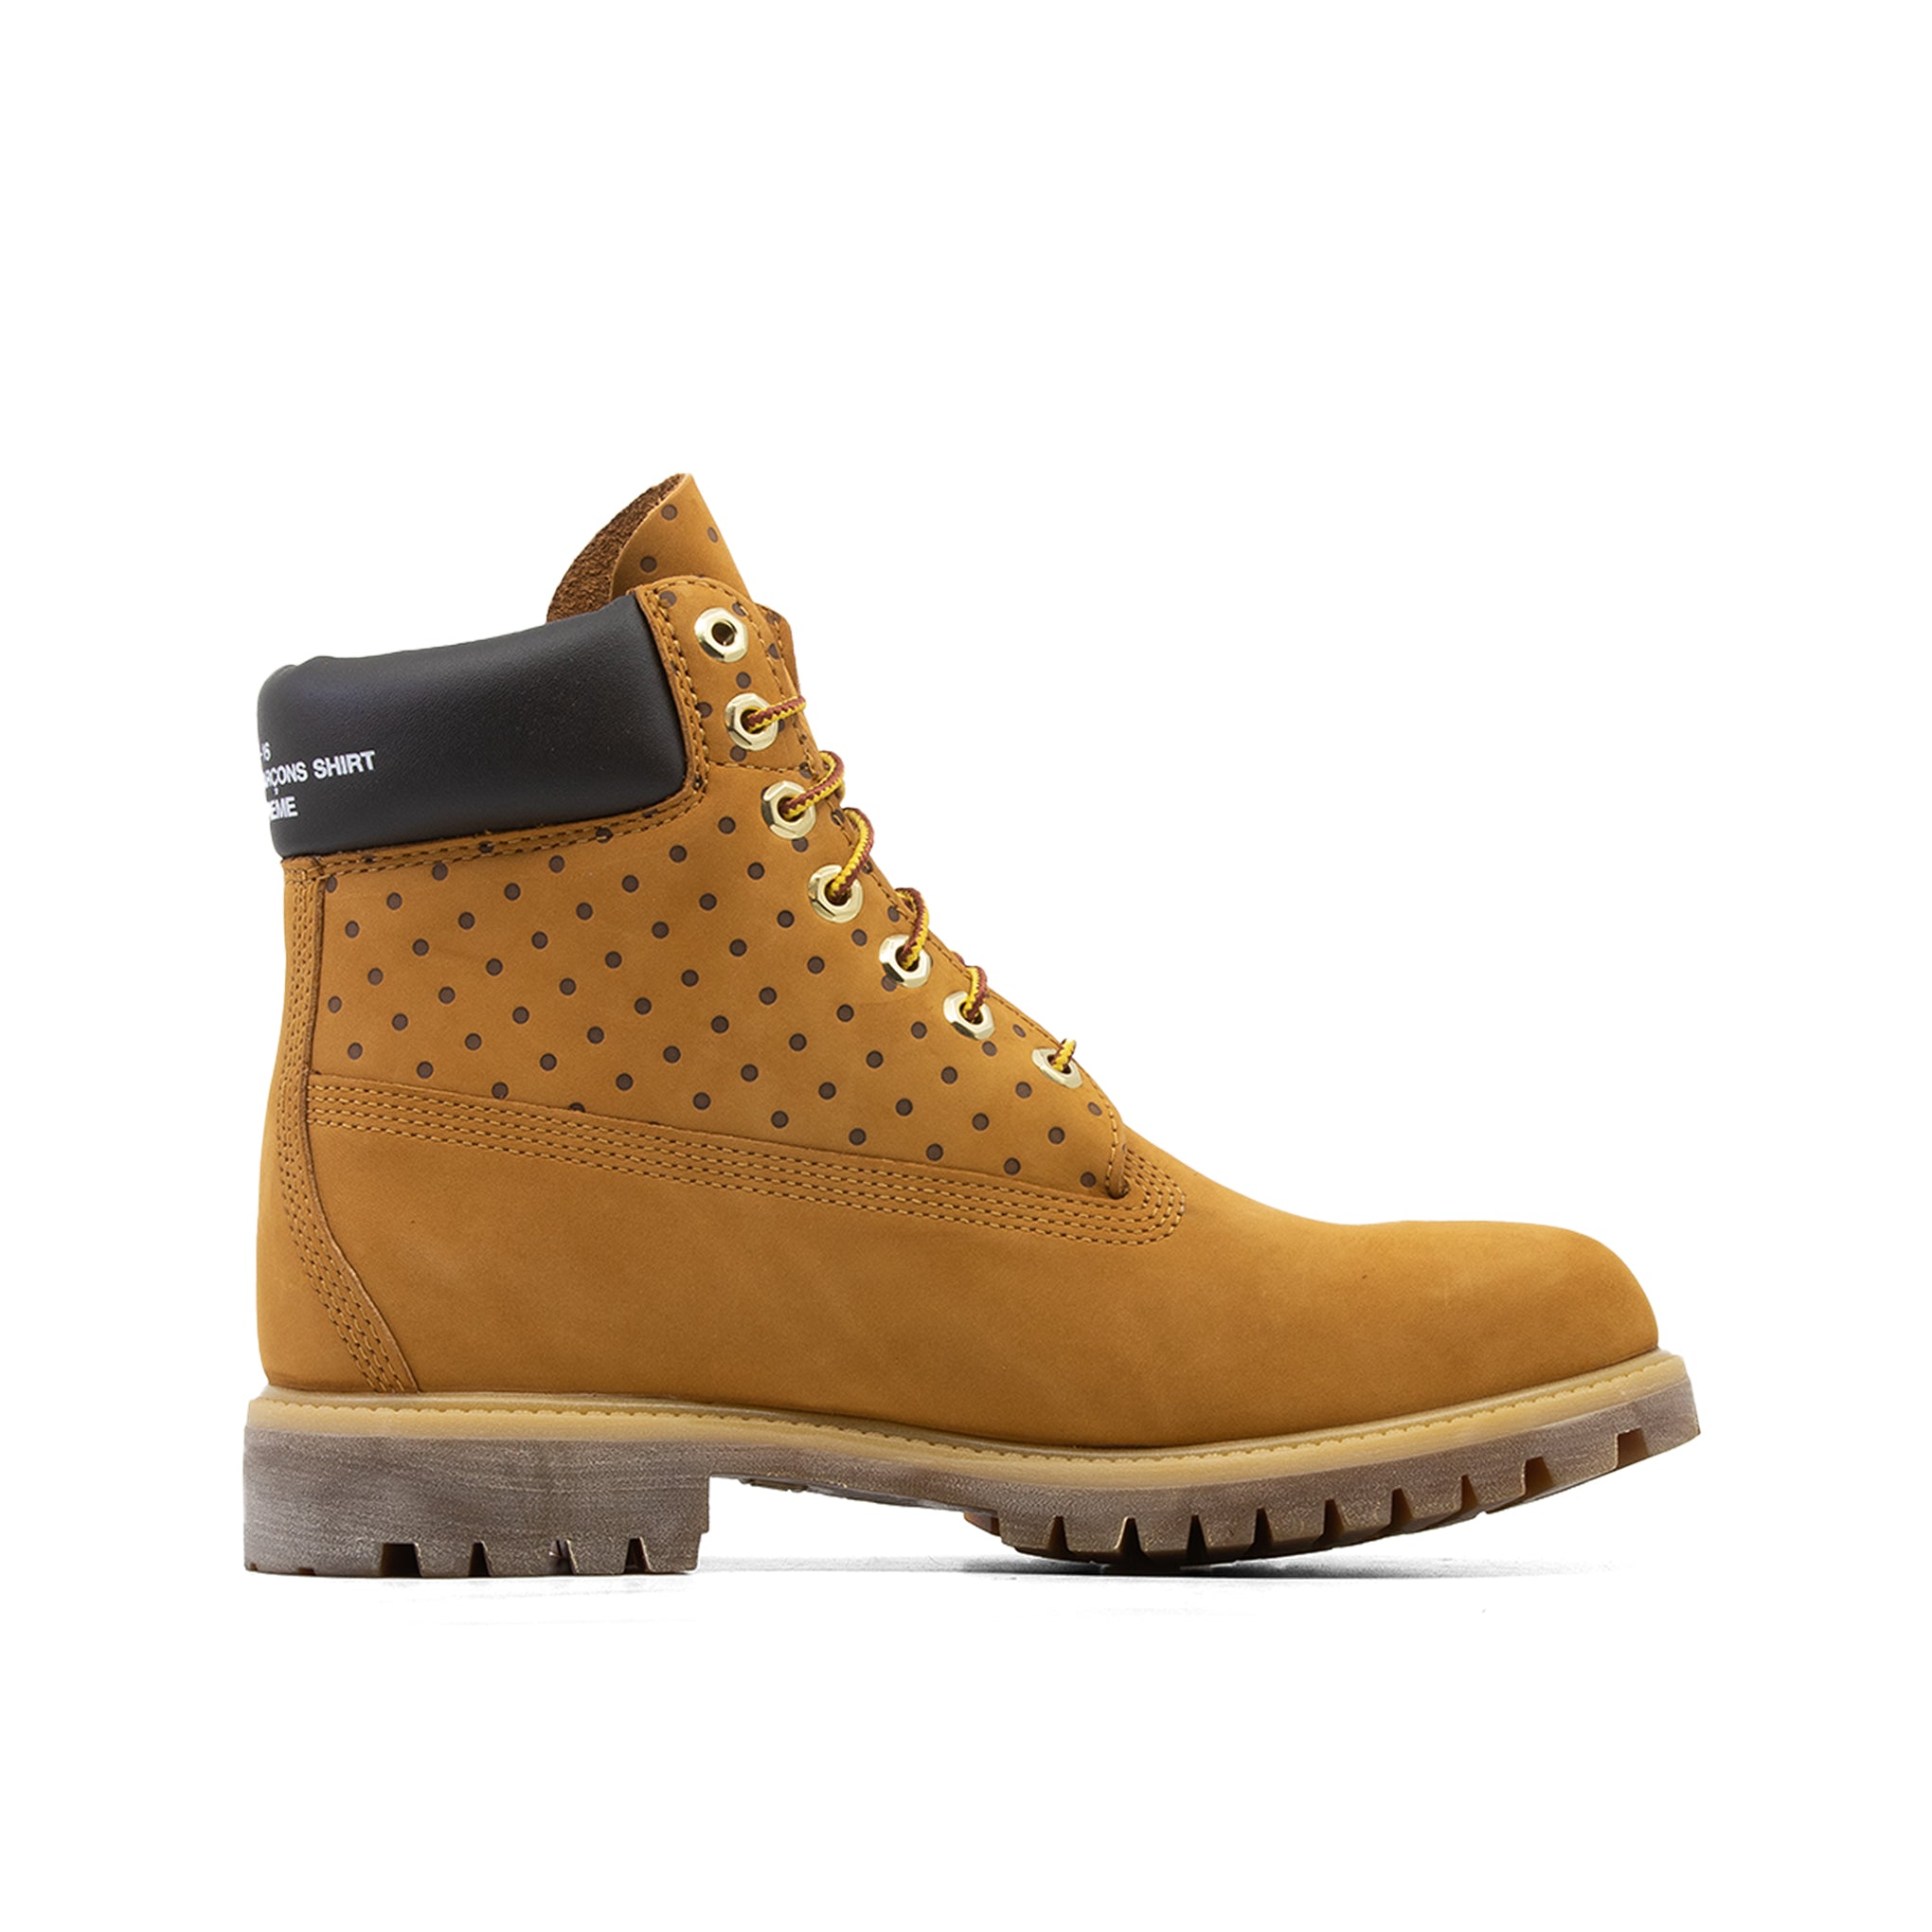 TIMBERLAND 6 INCH BOOT SUPREME COMME DES GARCONS WHEAT